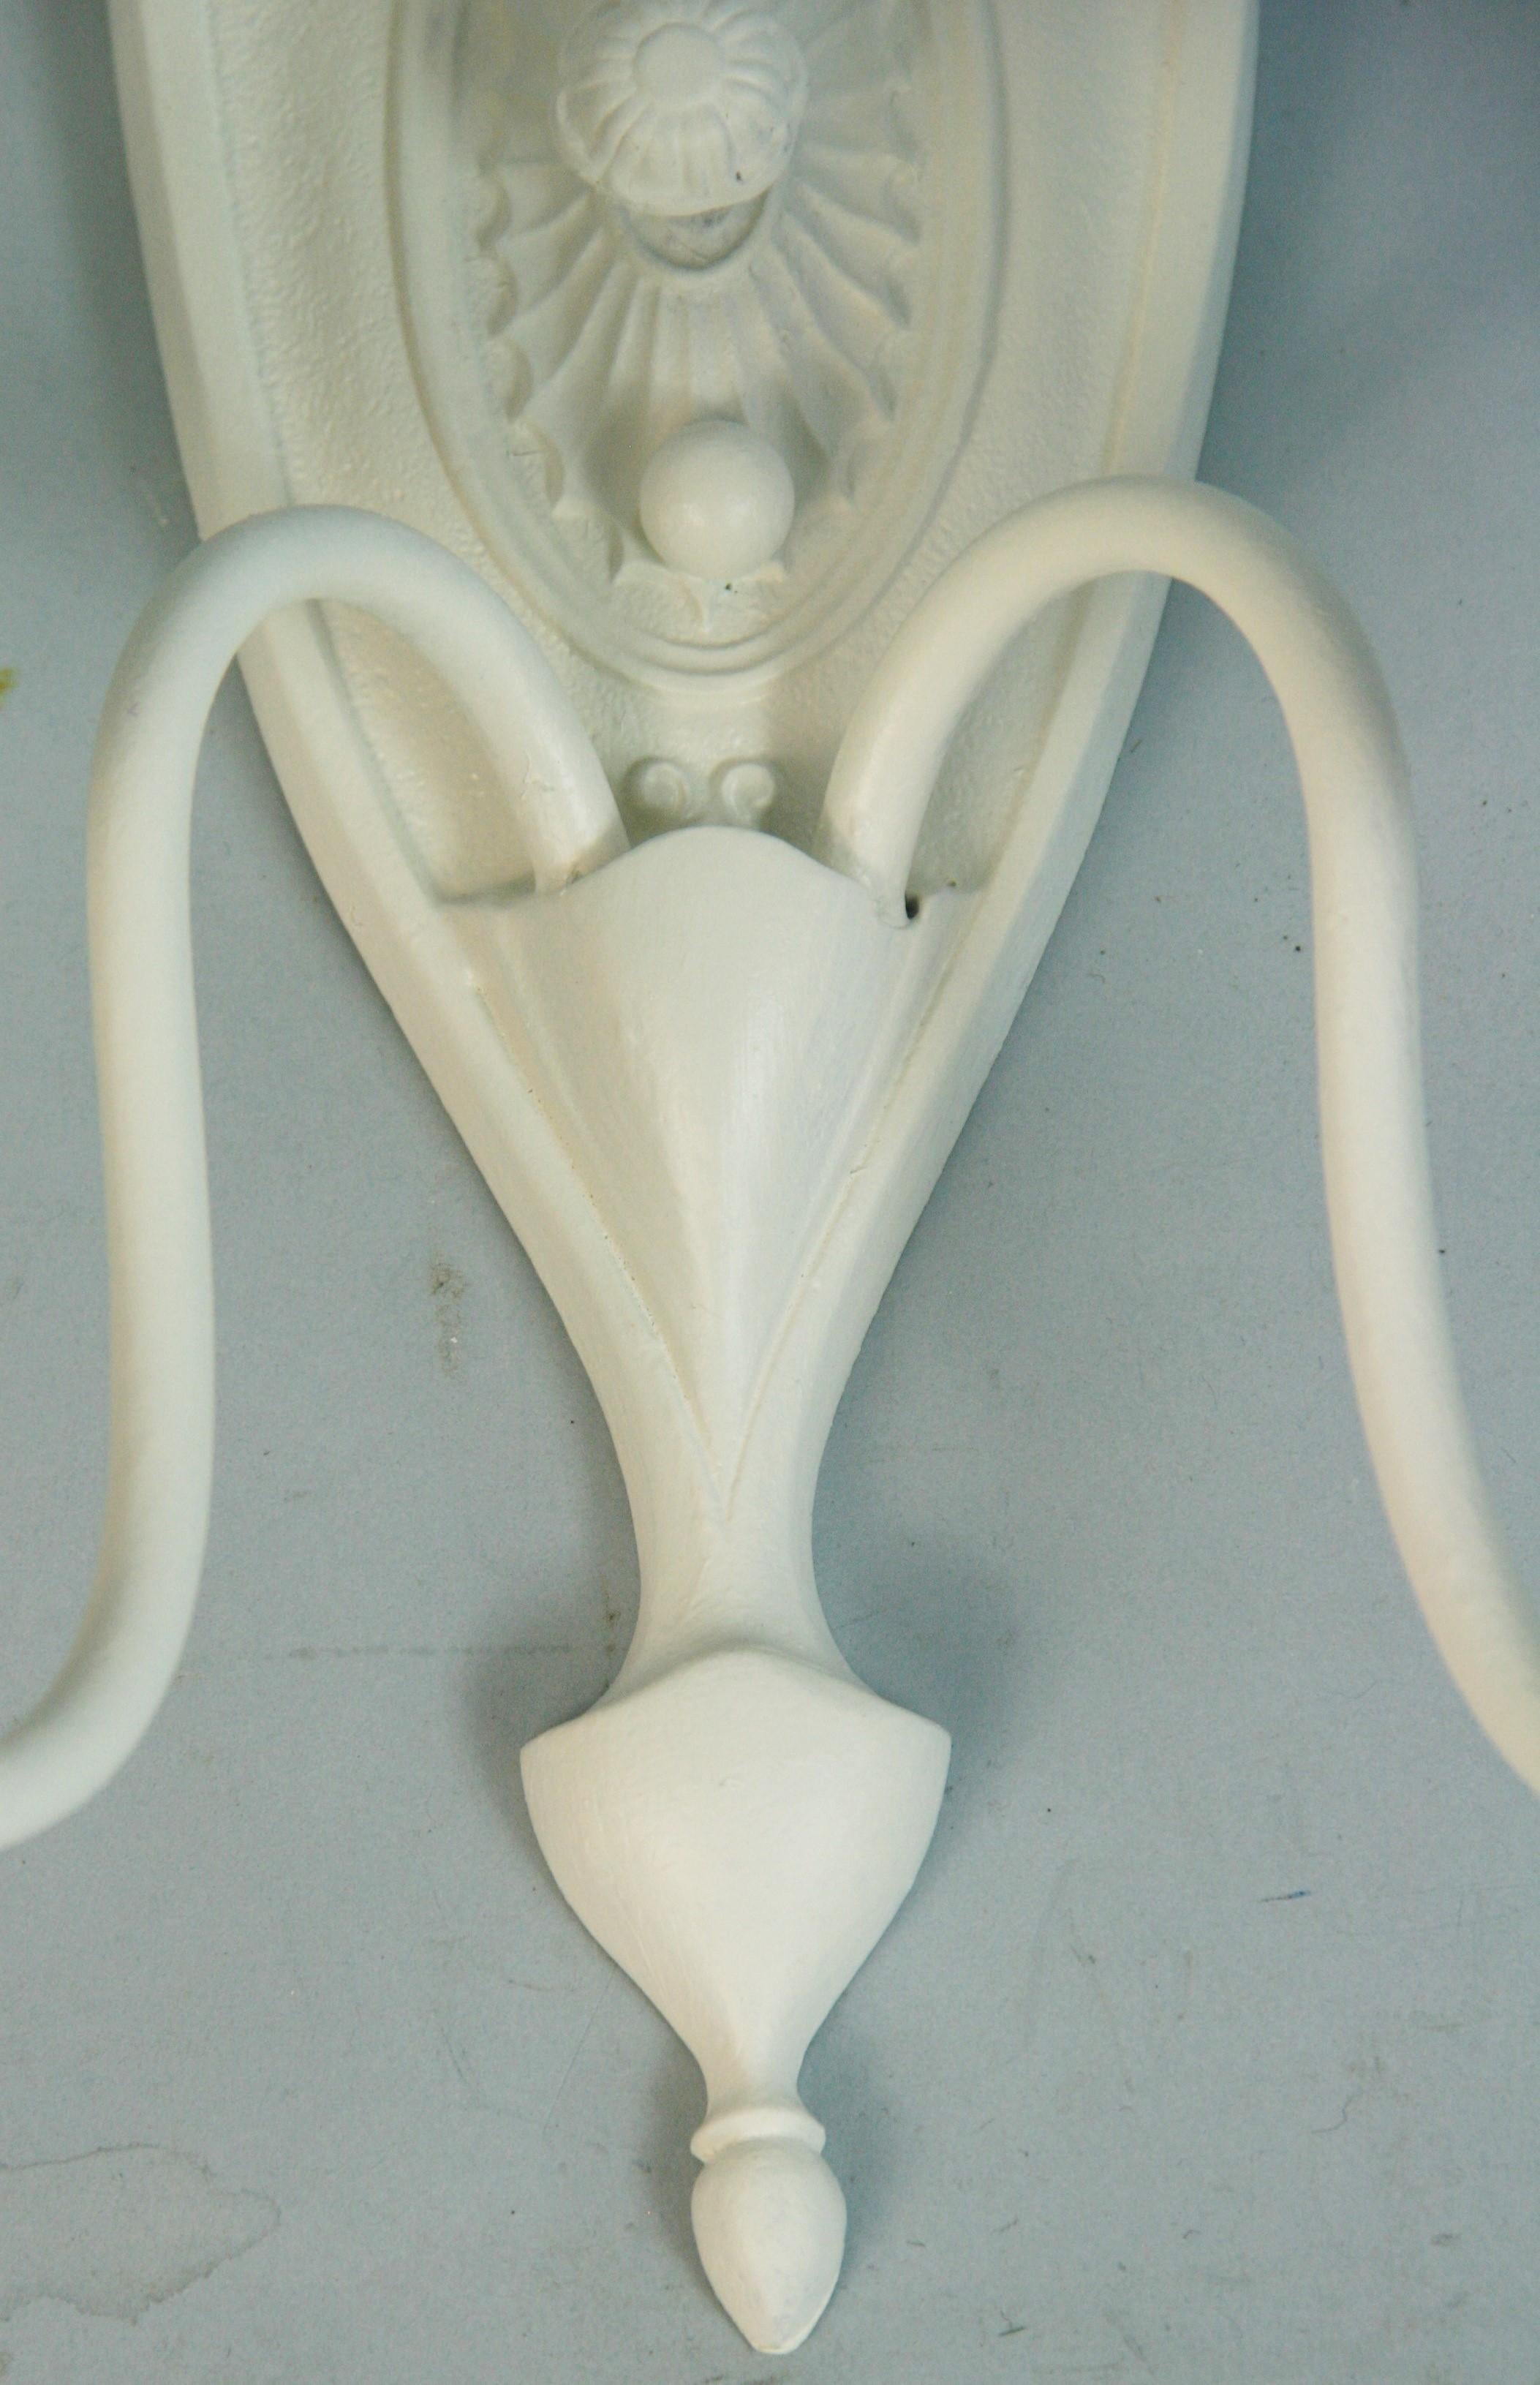 Antique Bronze Pediment Top Wall Sconces in a White Lacquer Finish a Pair 1930's For Sale 2